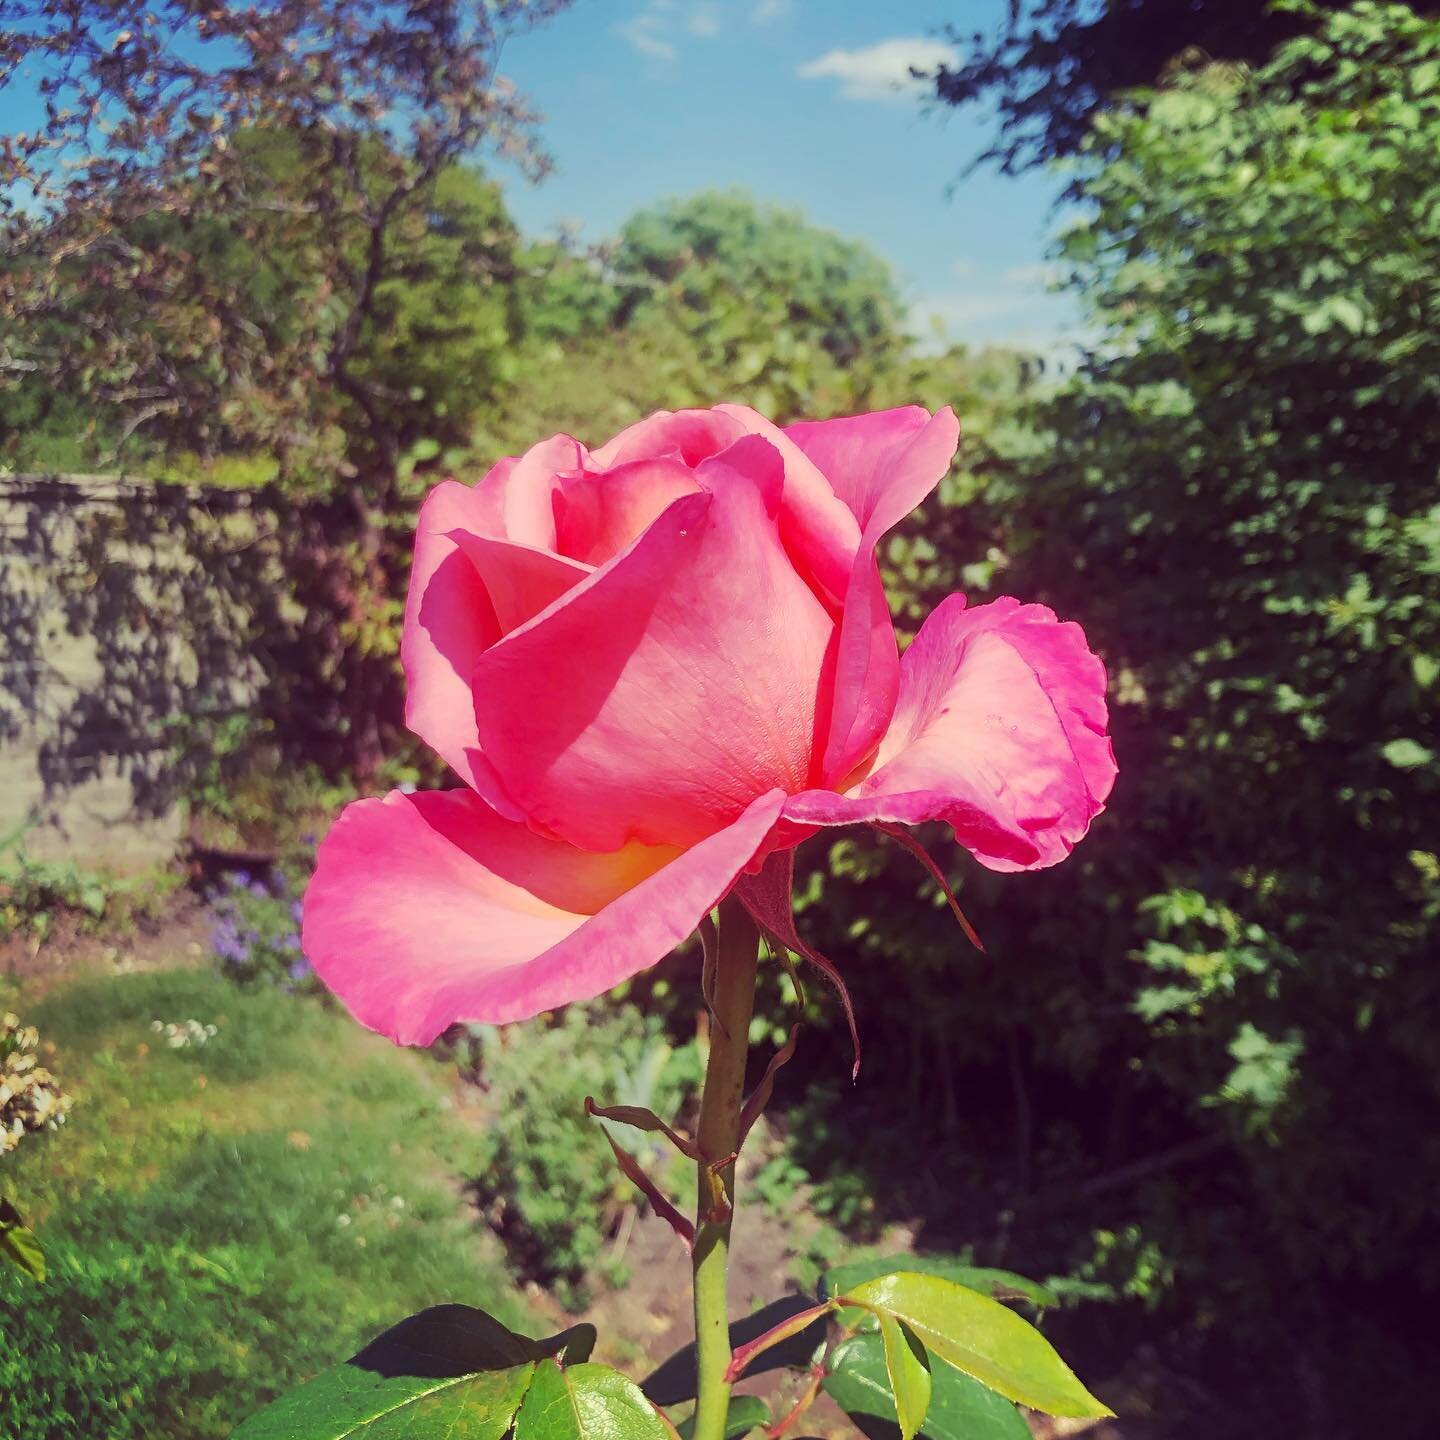 Rose in my garden - we think of love and harmony, a gentle heart soothing scent. At the moment I relate to it for its Resilience being able to adapt and accommodate whilst staying soft , smooth and feminine - that may equate to your current Skincare 